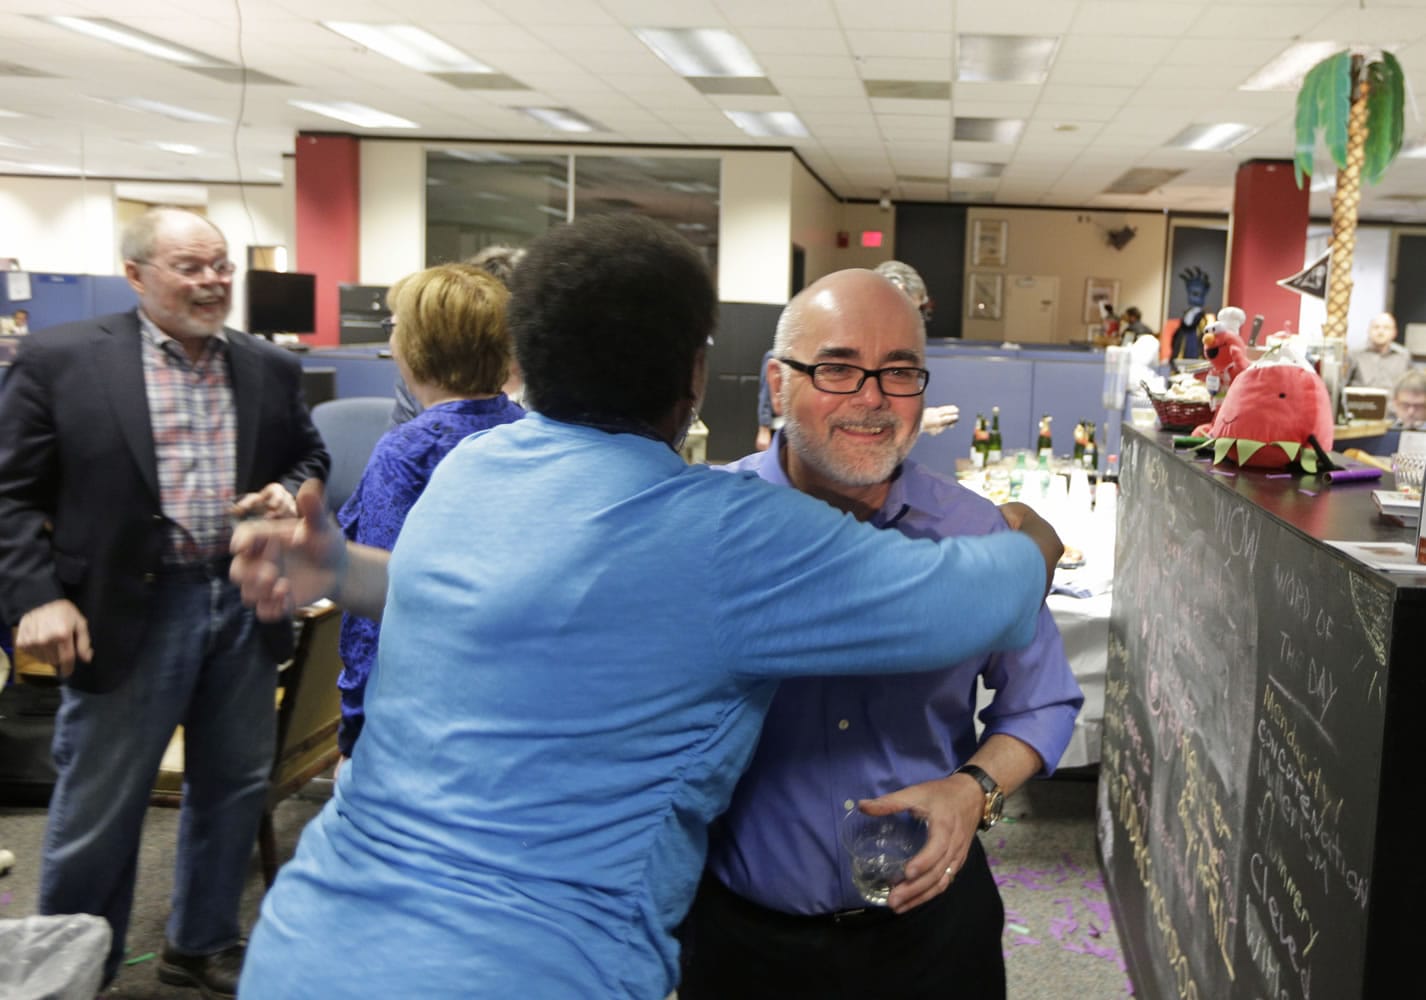 Charlotte Observer editorial cartoonist Kevin Siers, right, gets a hug from a co-worker as the newsroom celebrates Siers winning the Pulitzer Prize for Editorial Cartooning at the newspaper in Charlotte, N.C., on Monday.